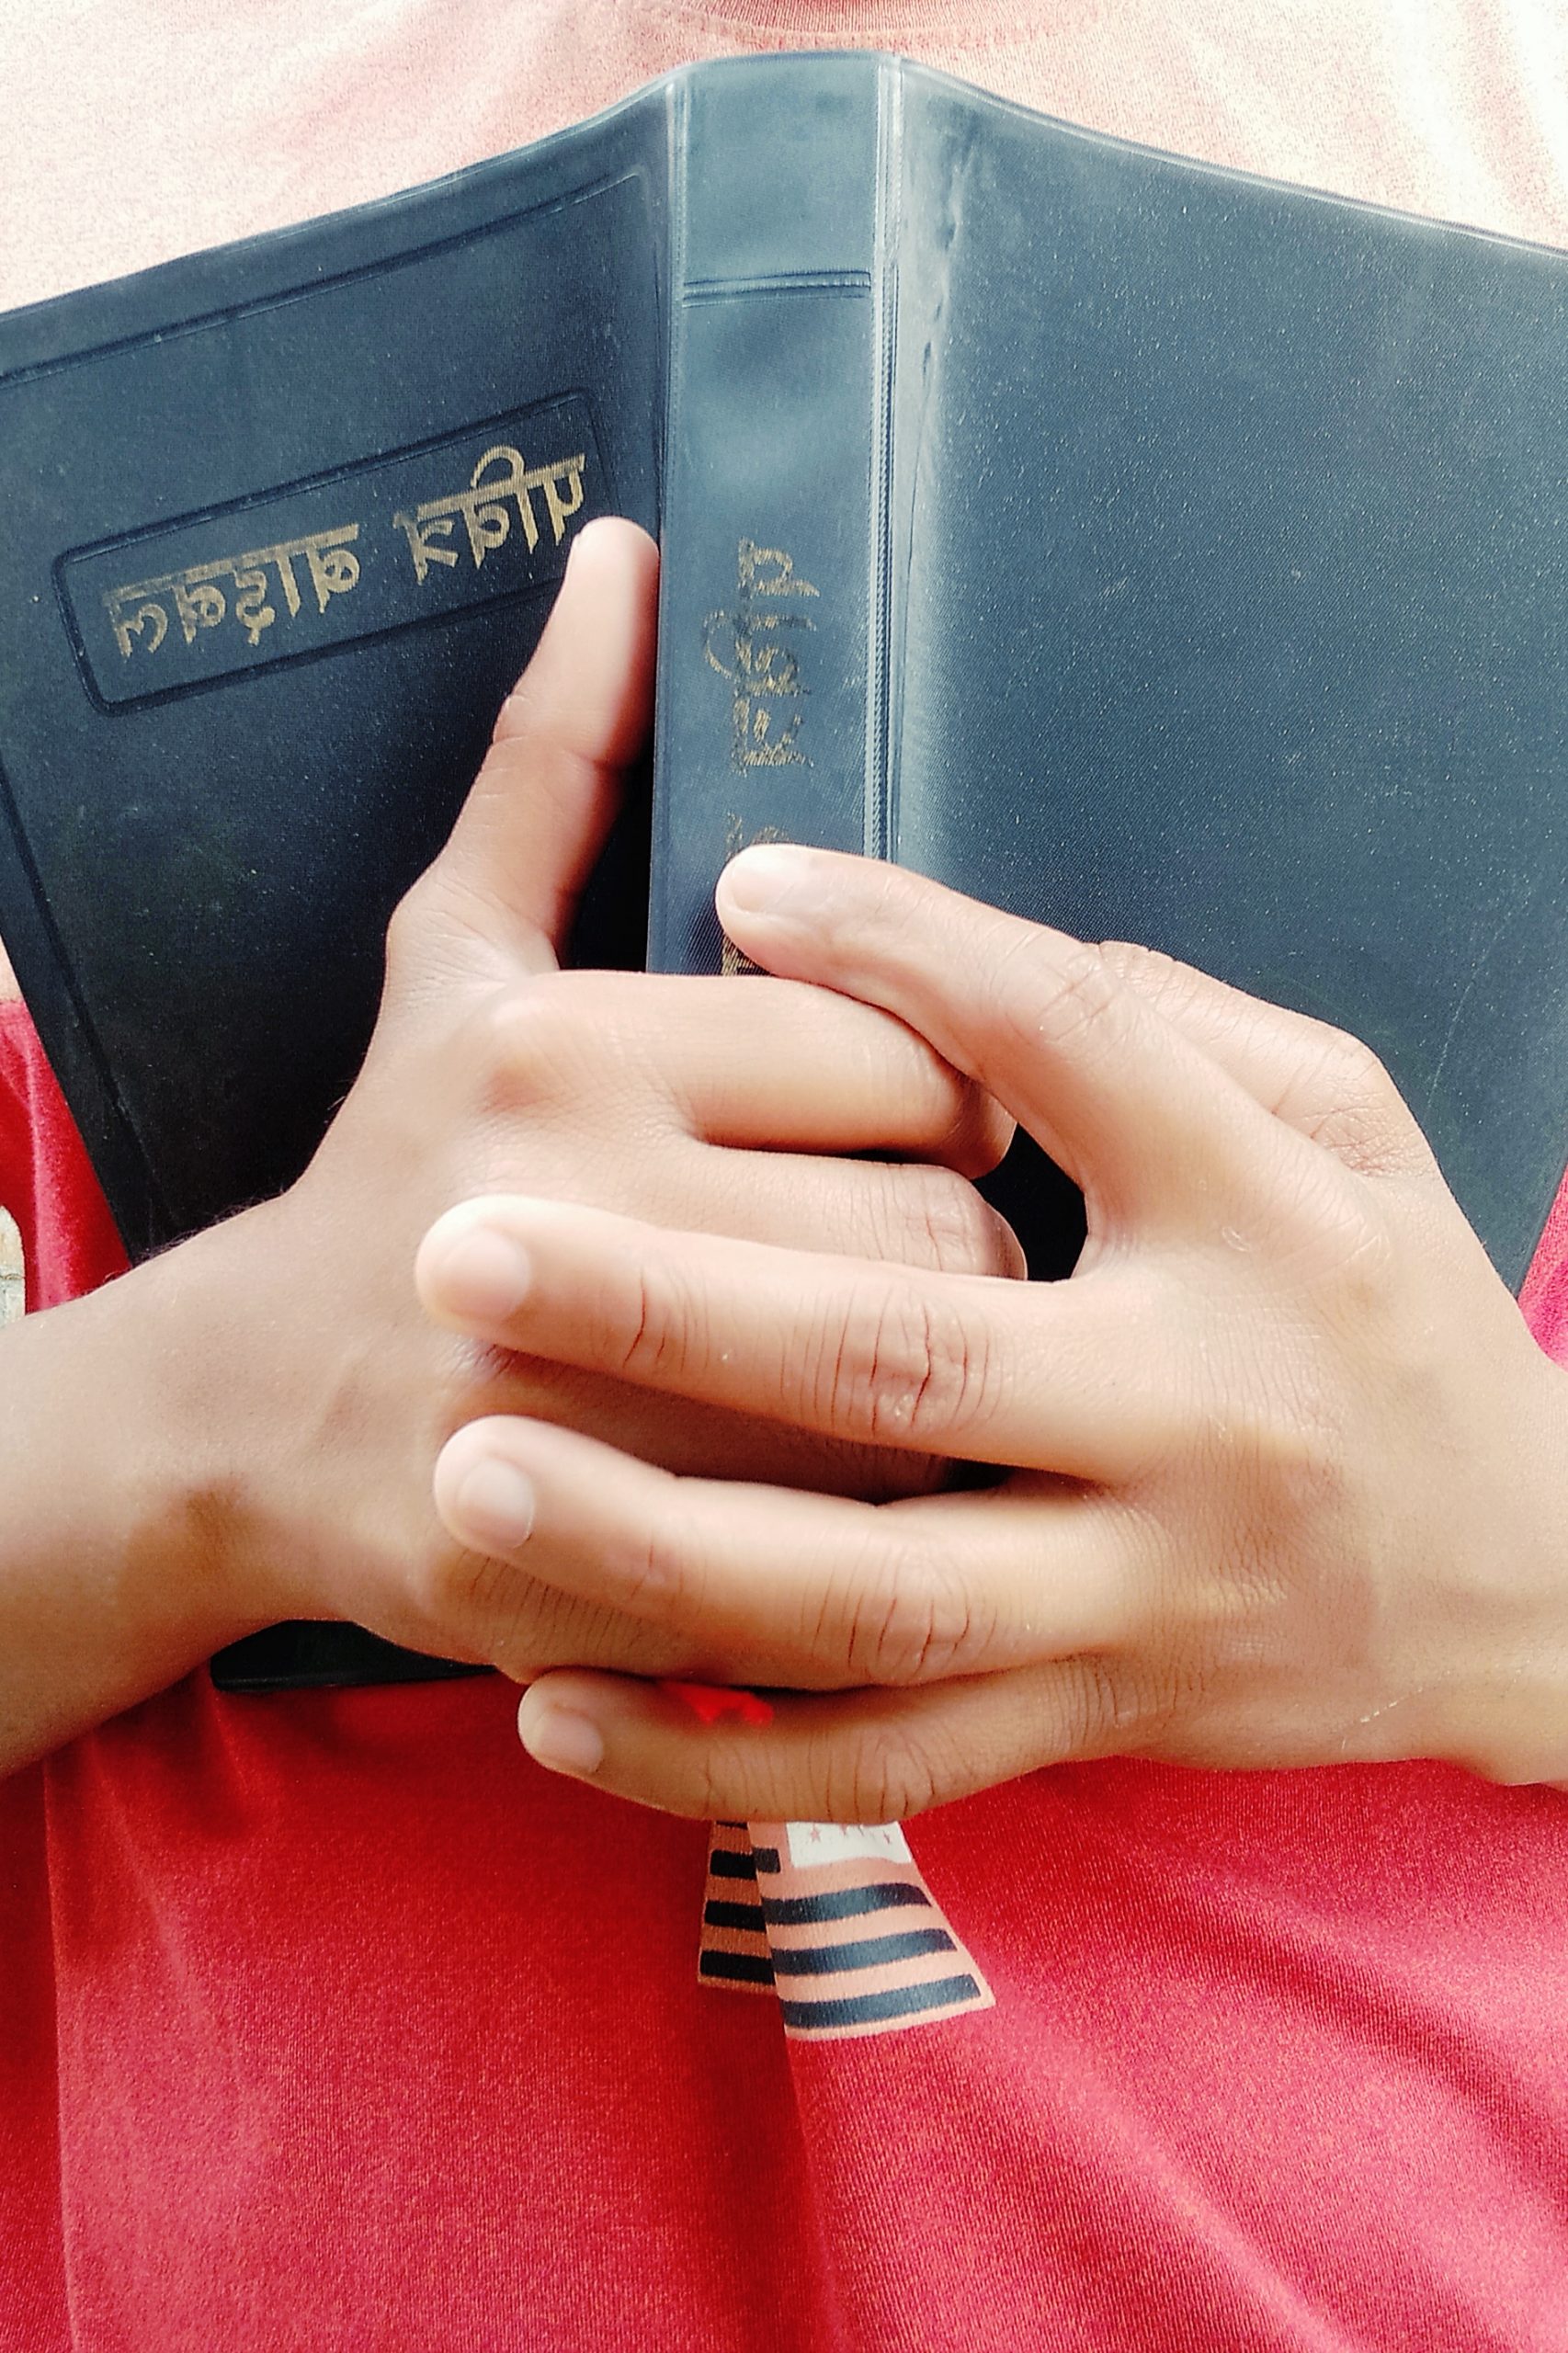 A religious book in hands